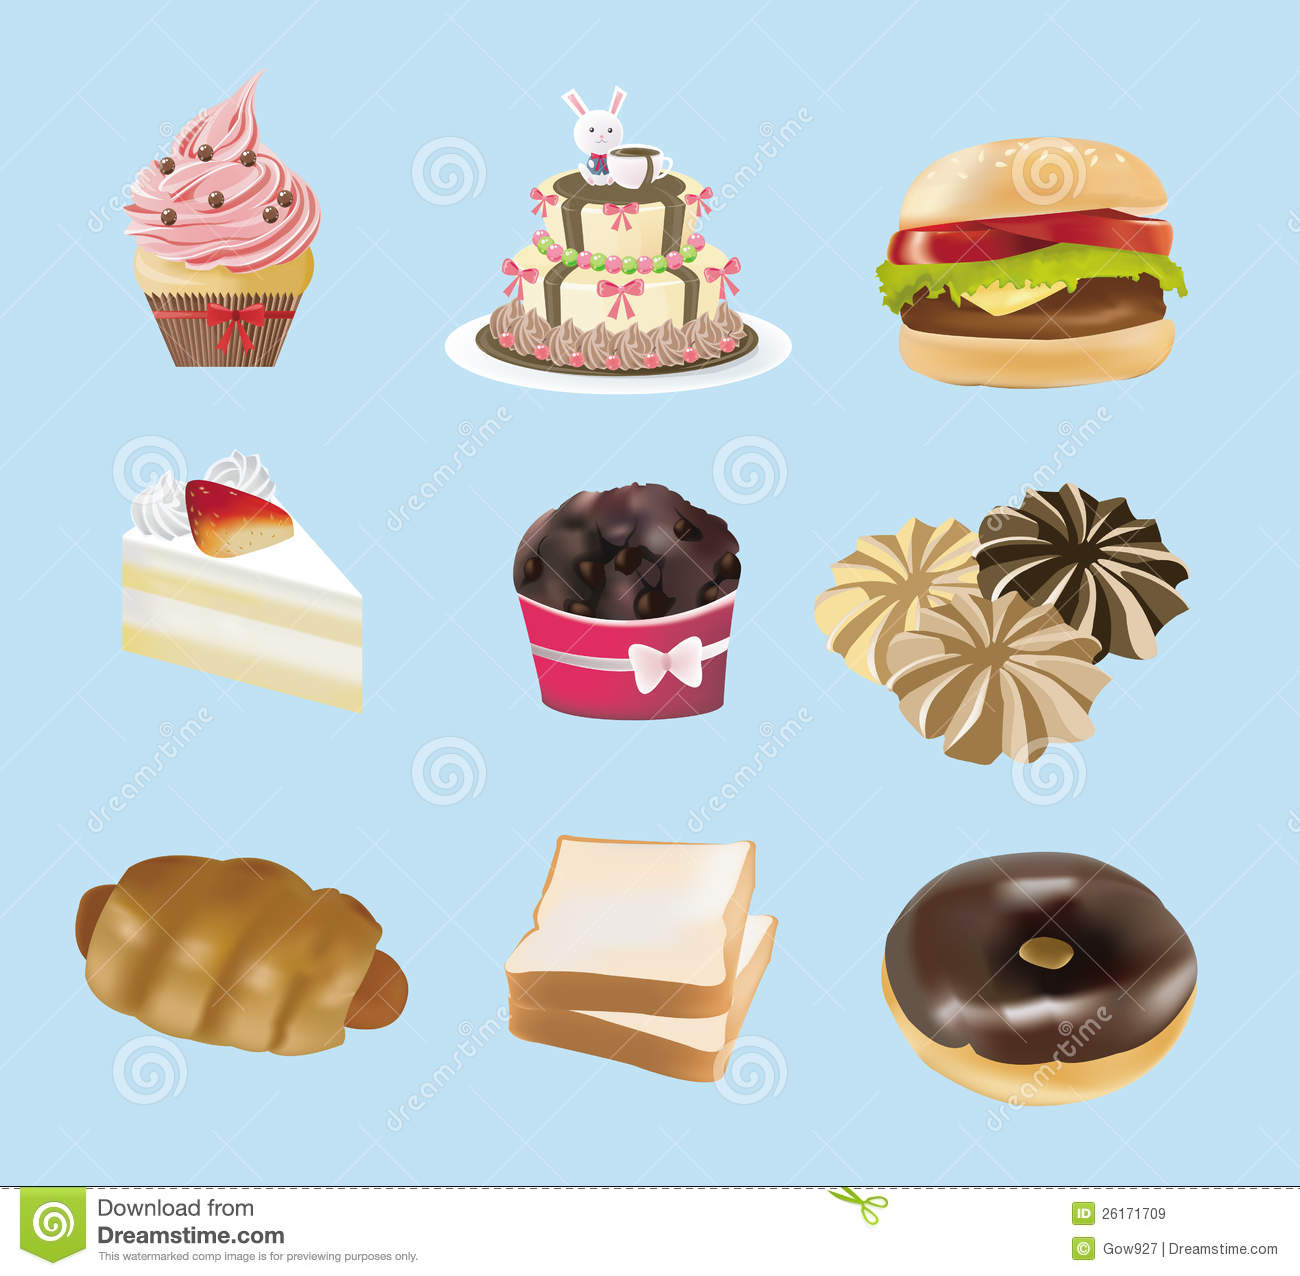 Sweets Bakery And Fast Food Collection Royalty Free Stock Images